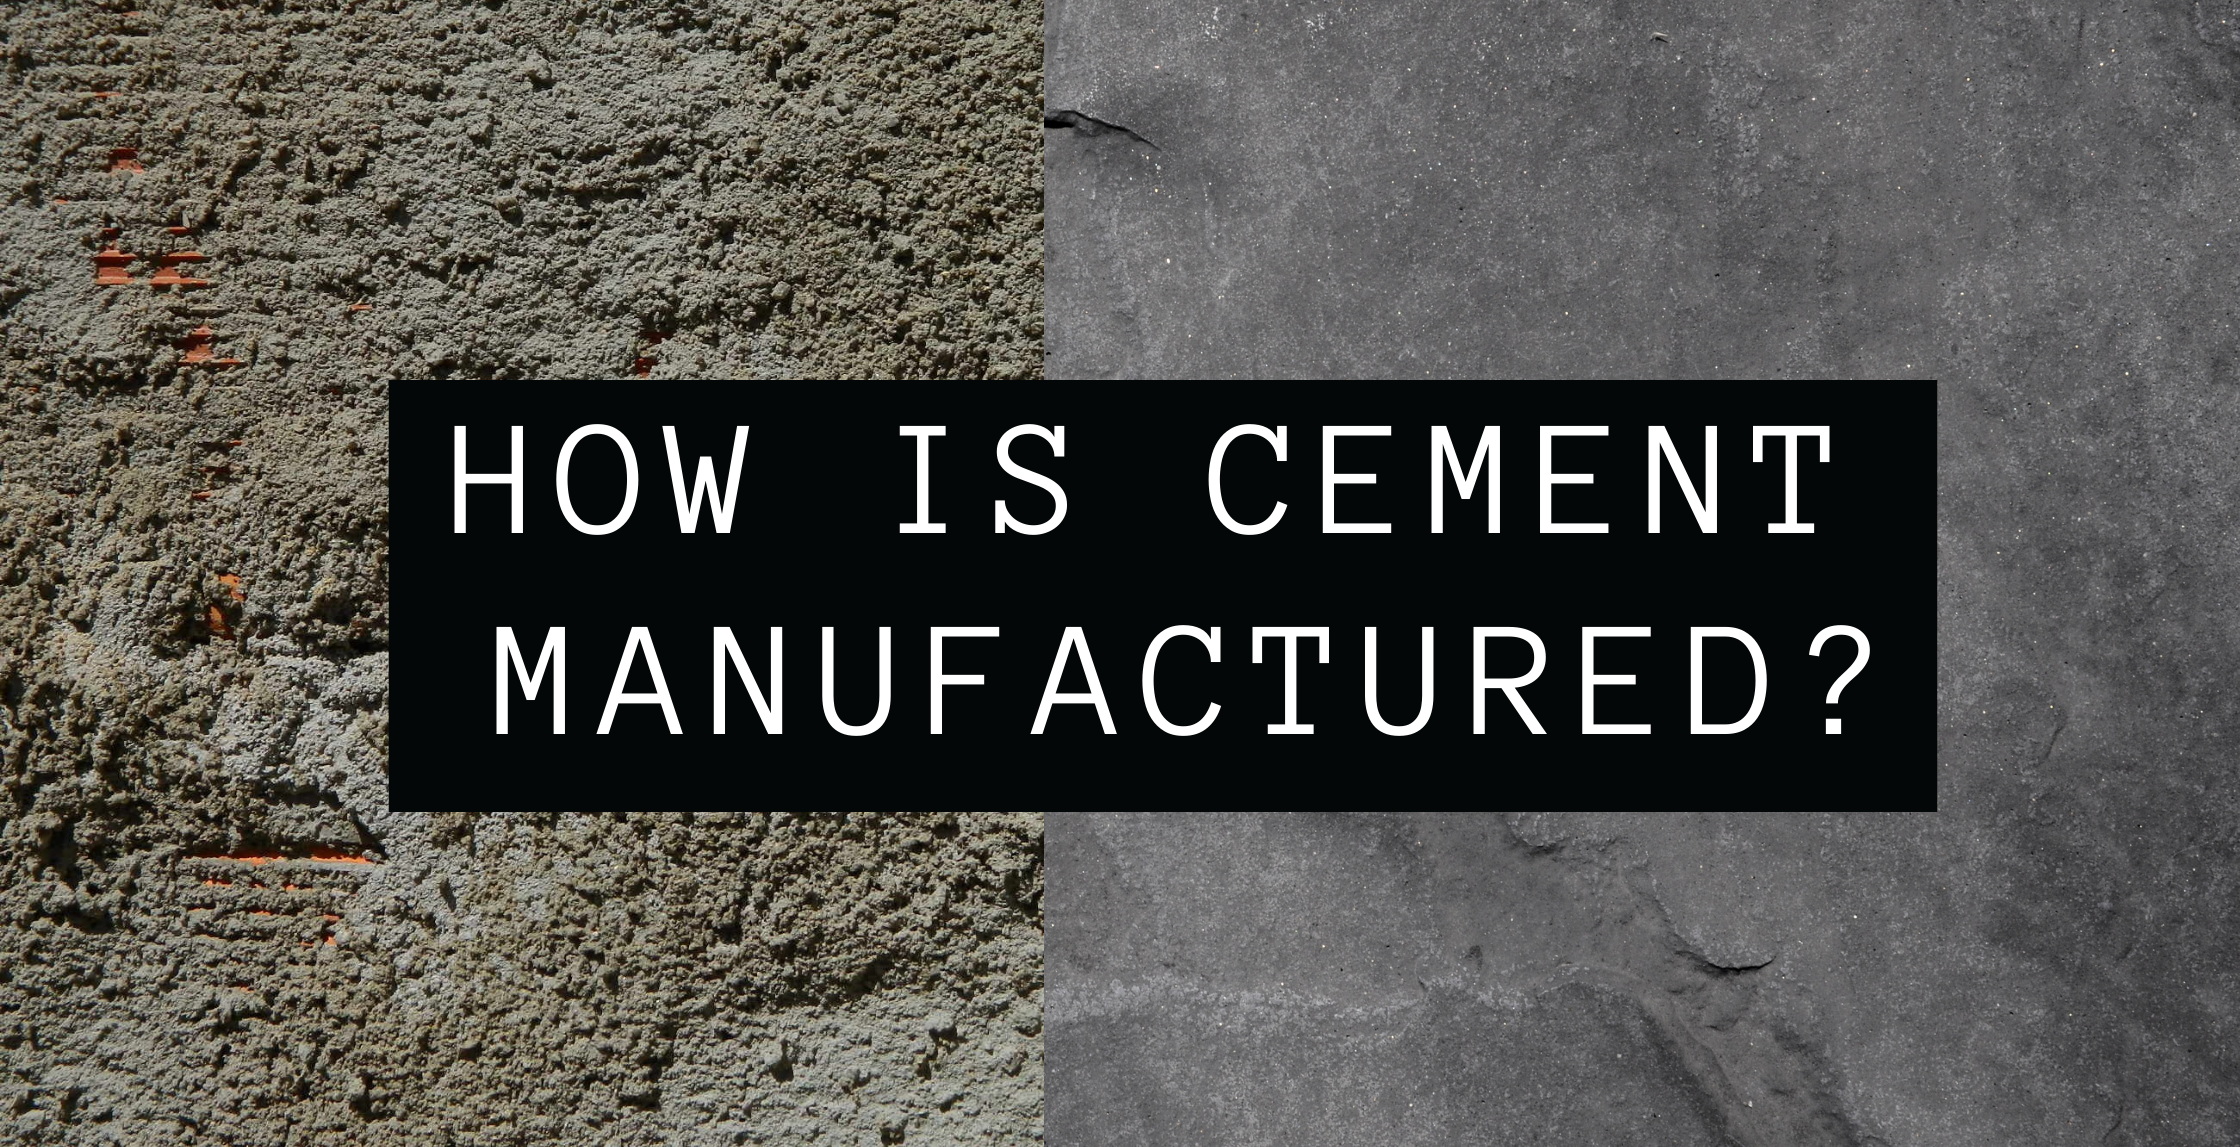 HOW IS CEMENT MANUFACTURED?